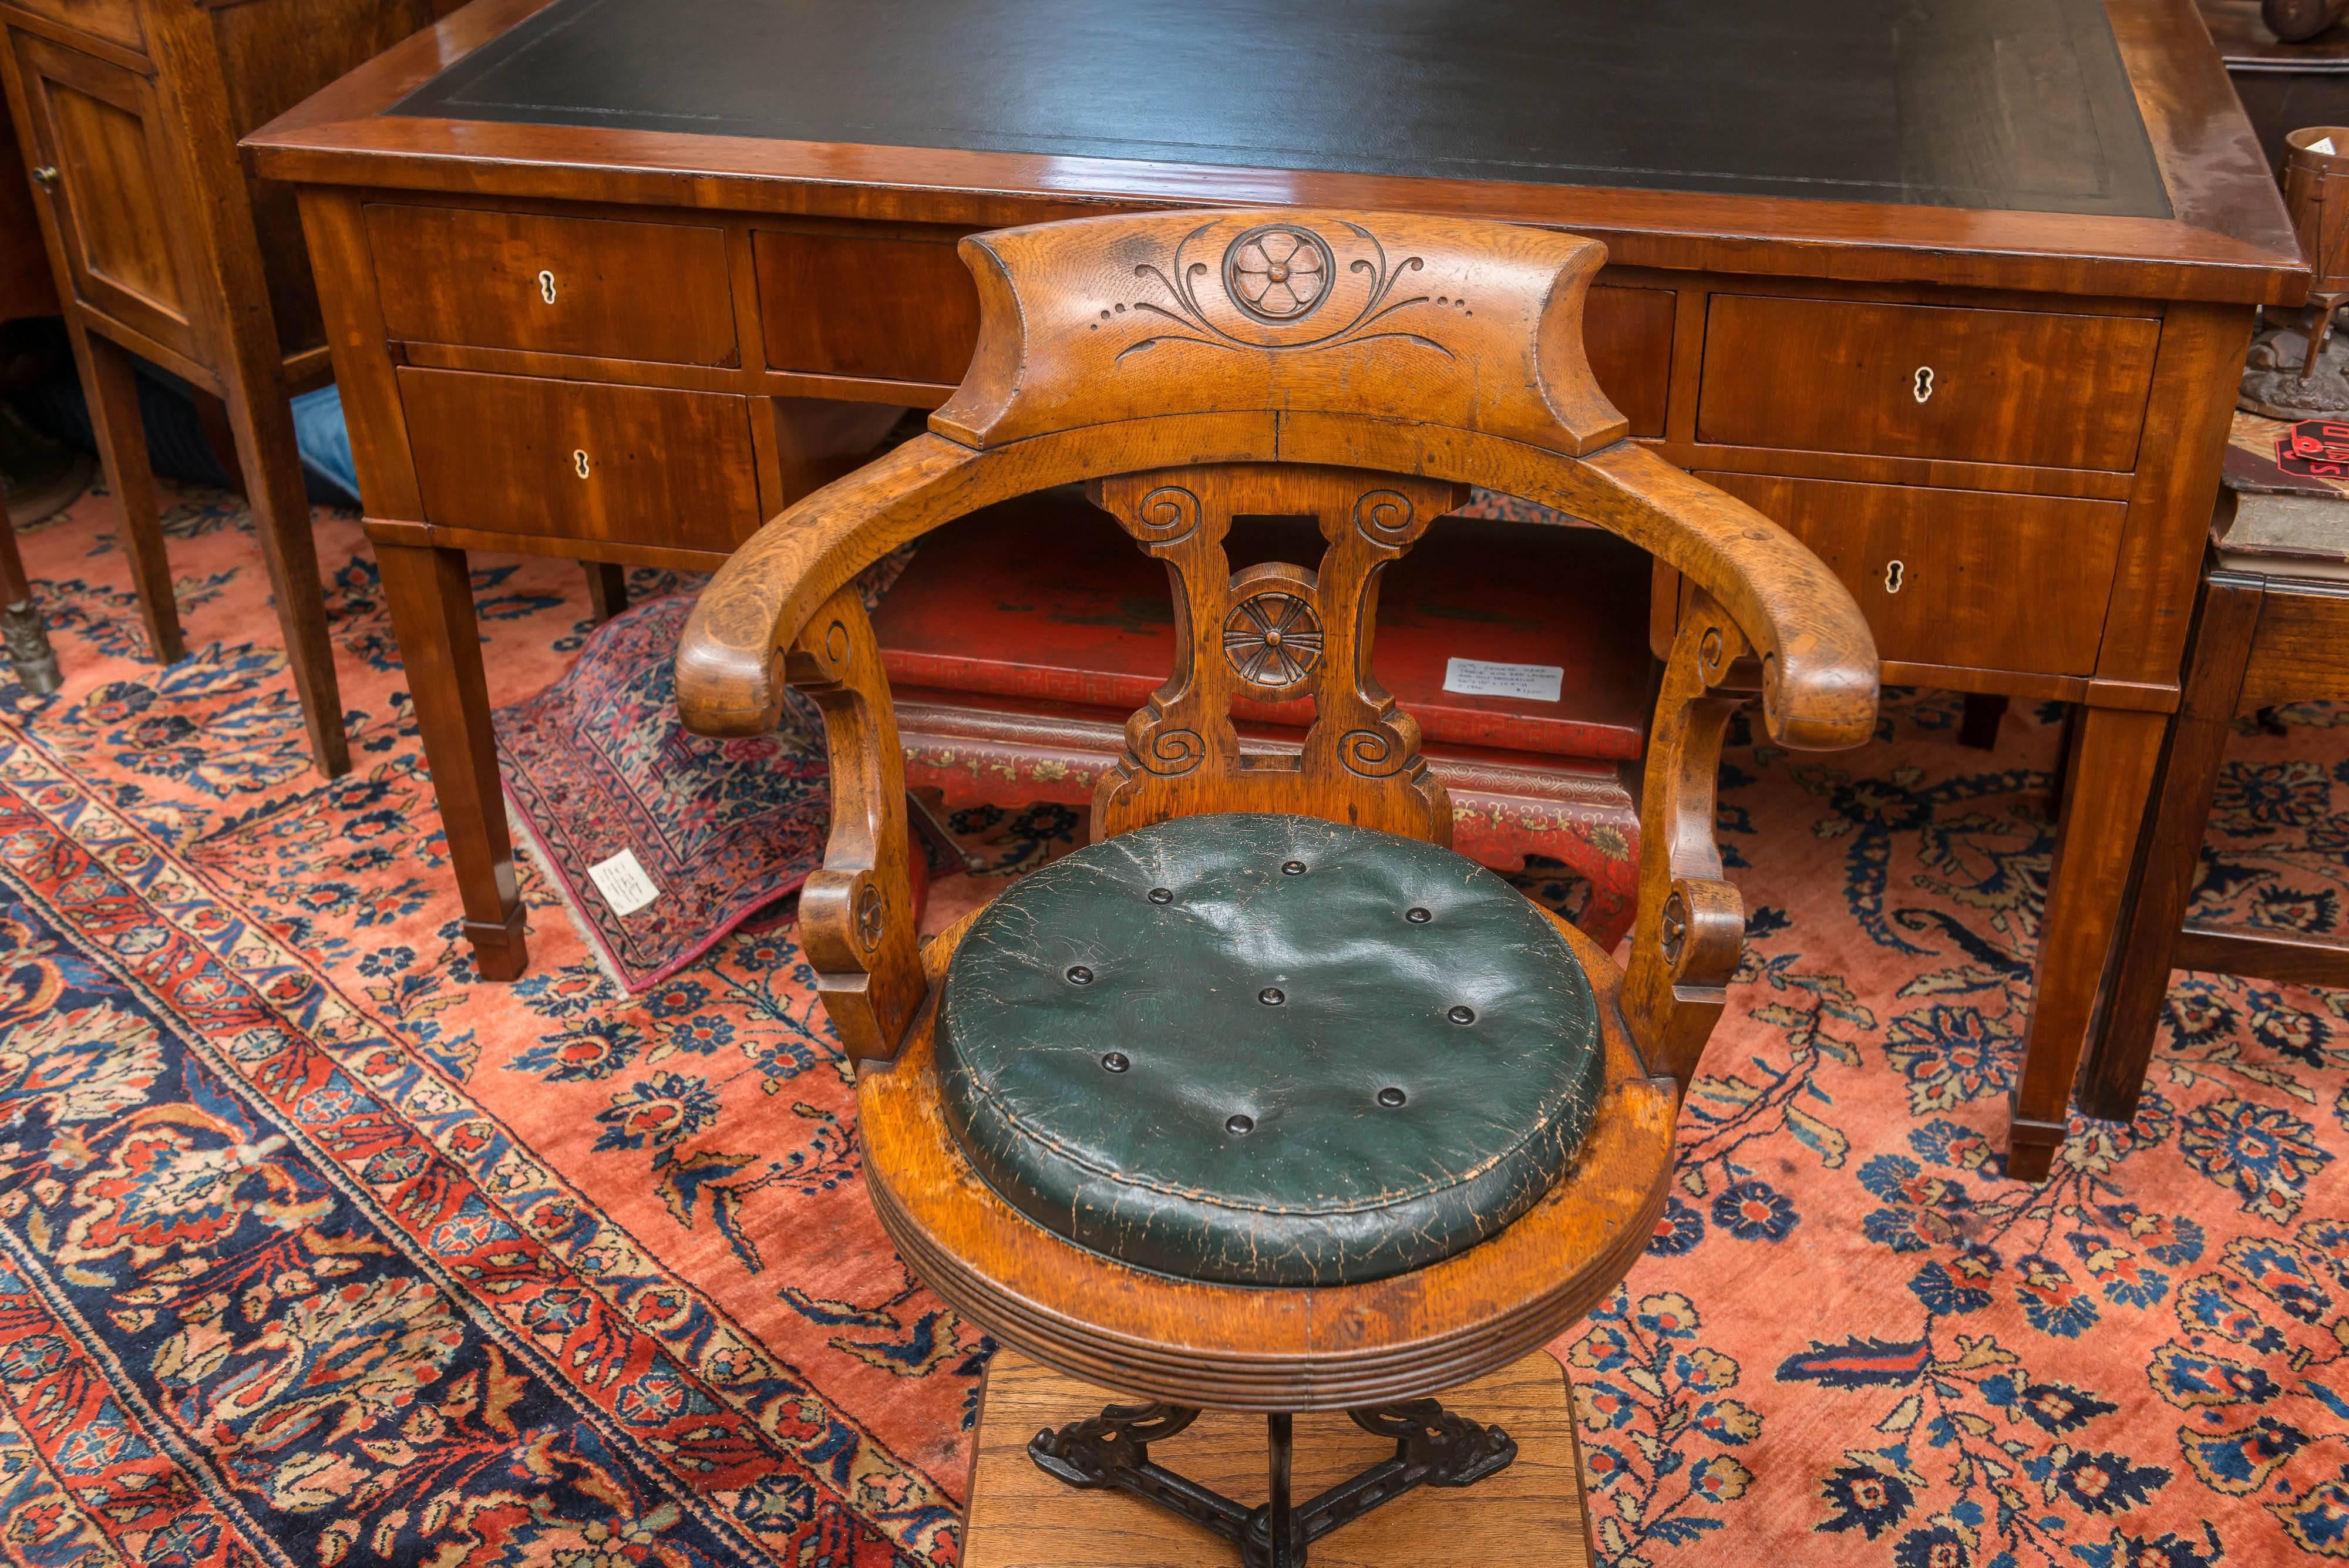 Late 19th century English ship's chair / stool. Authentic period nautical example.
Oak chair with a cast iron pivoting base and a leather button and tufted drop in cushion.
This chair rotates 180 degrees and stops. When rotating the chair pulls